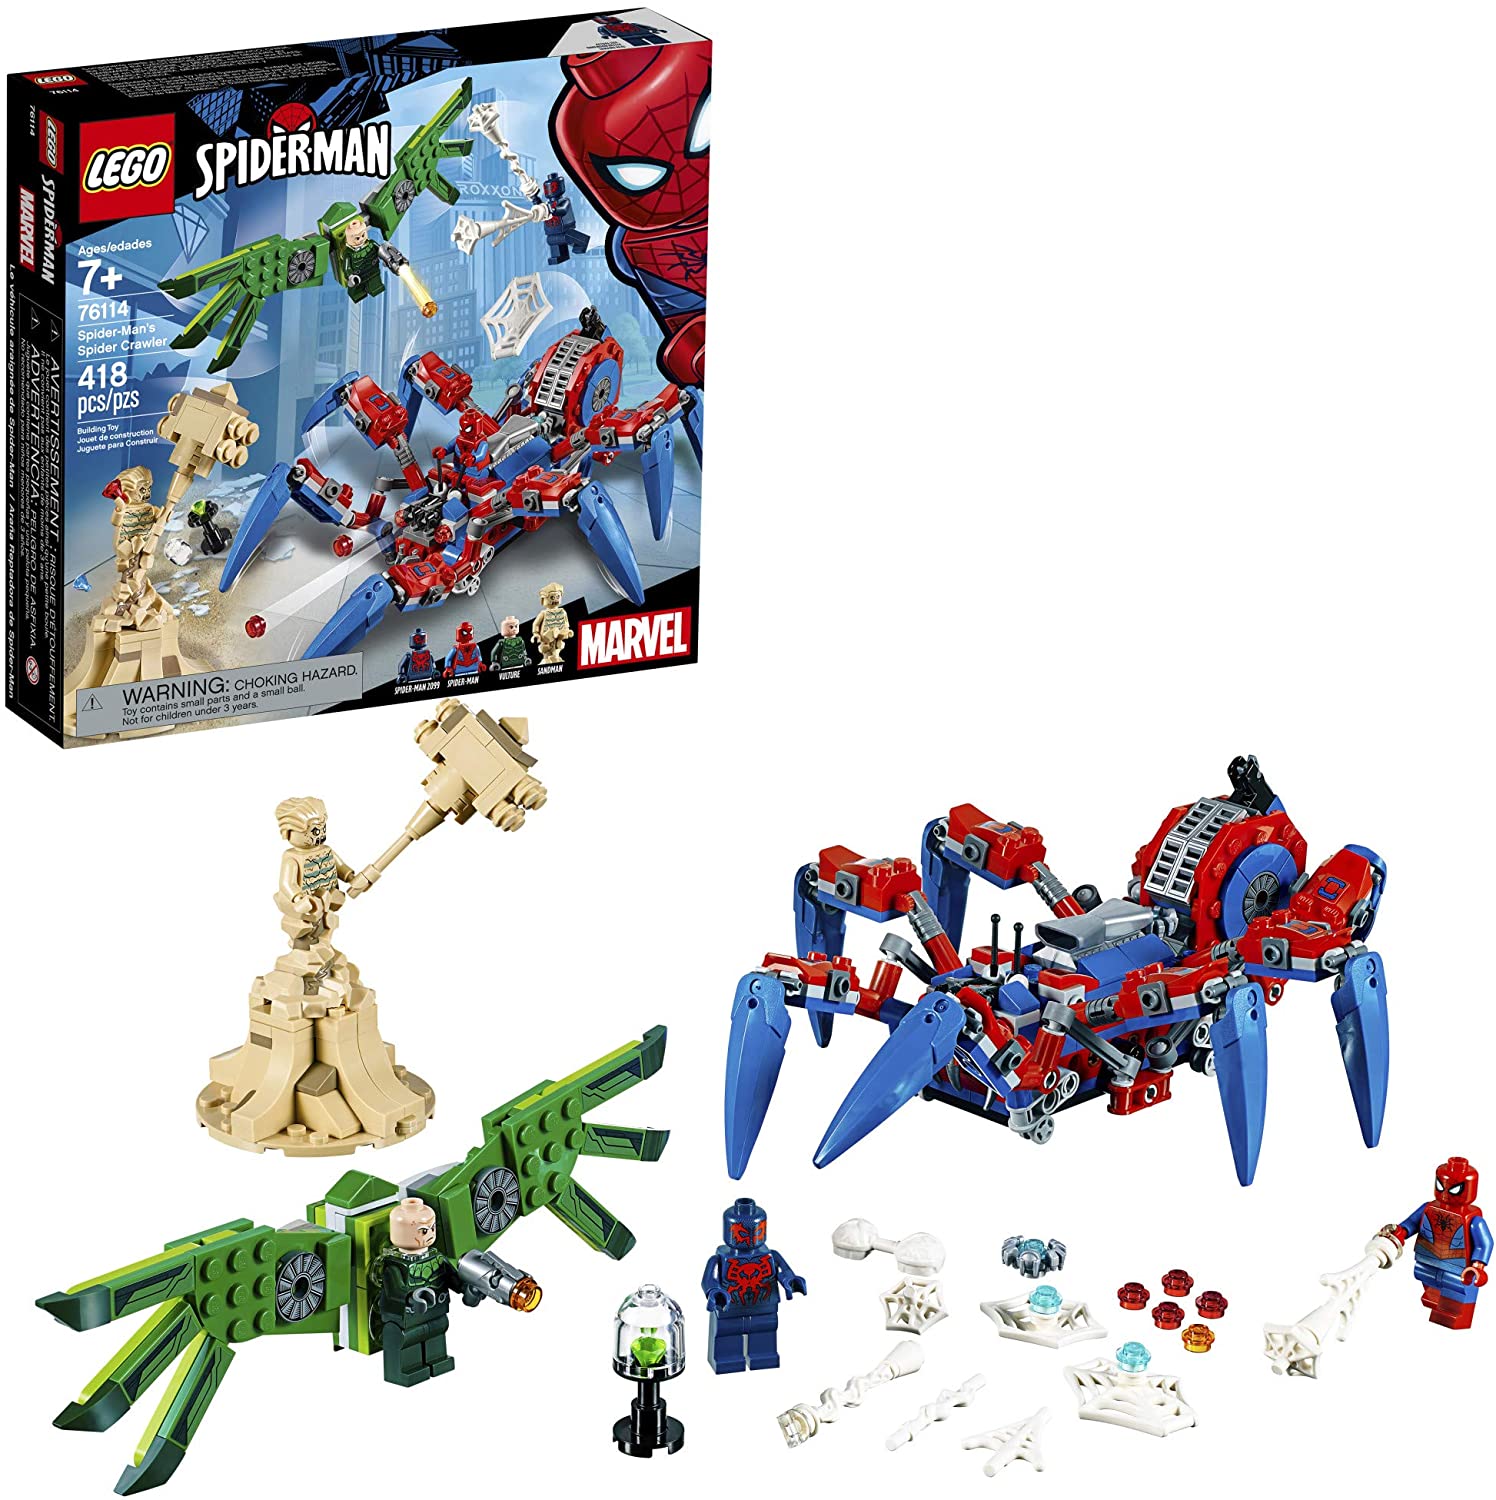 LEGO Aged 7 Plus Super Heroes Spider Man Spider Crawler Toy Of 418 Piece Sets